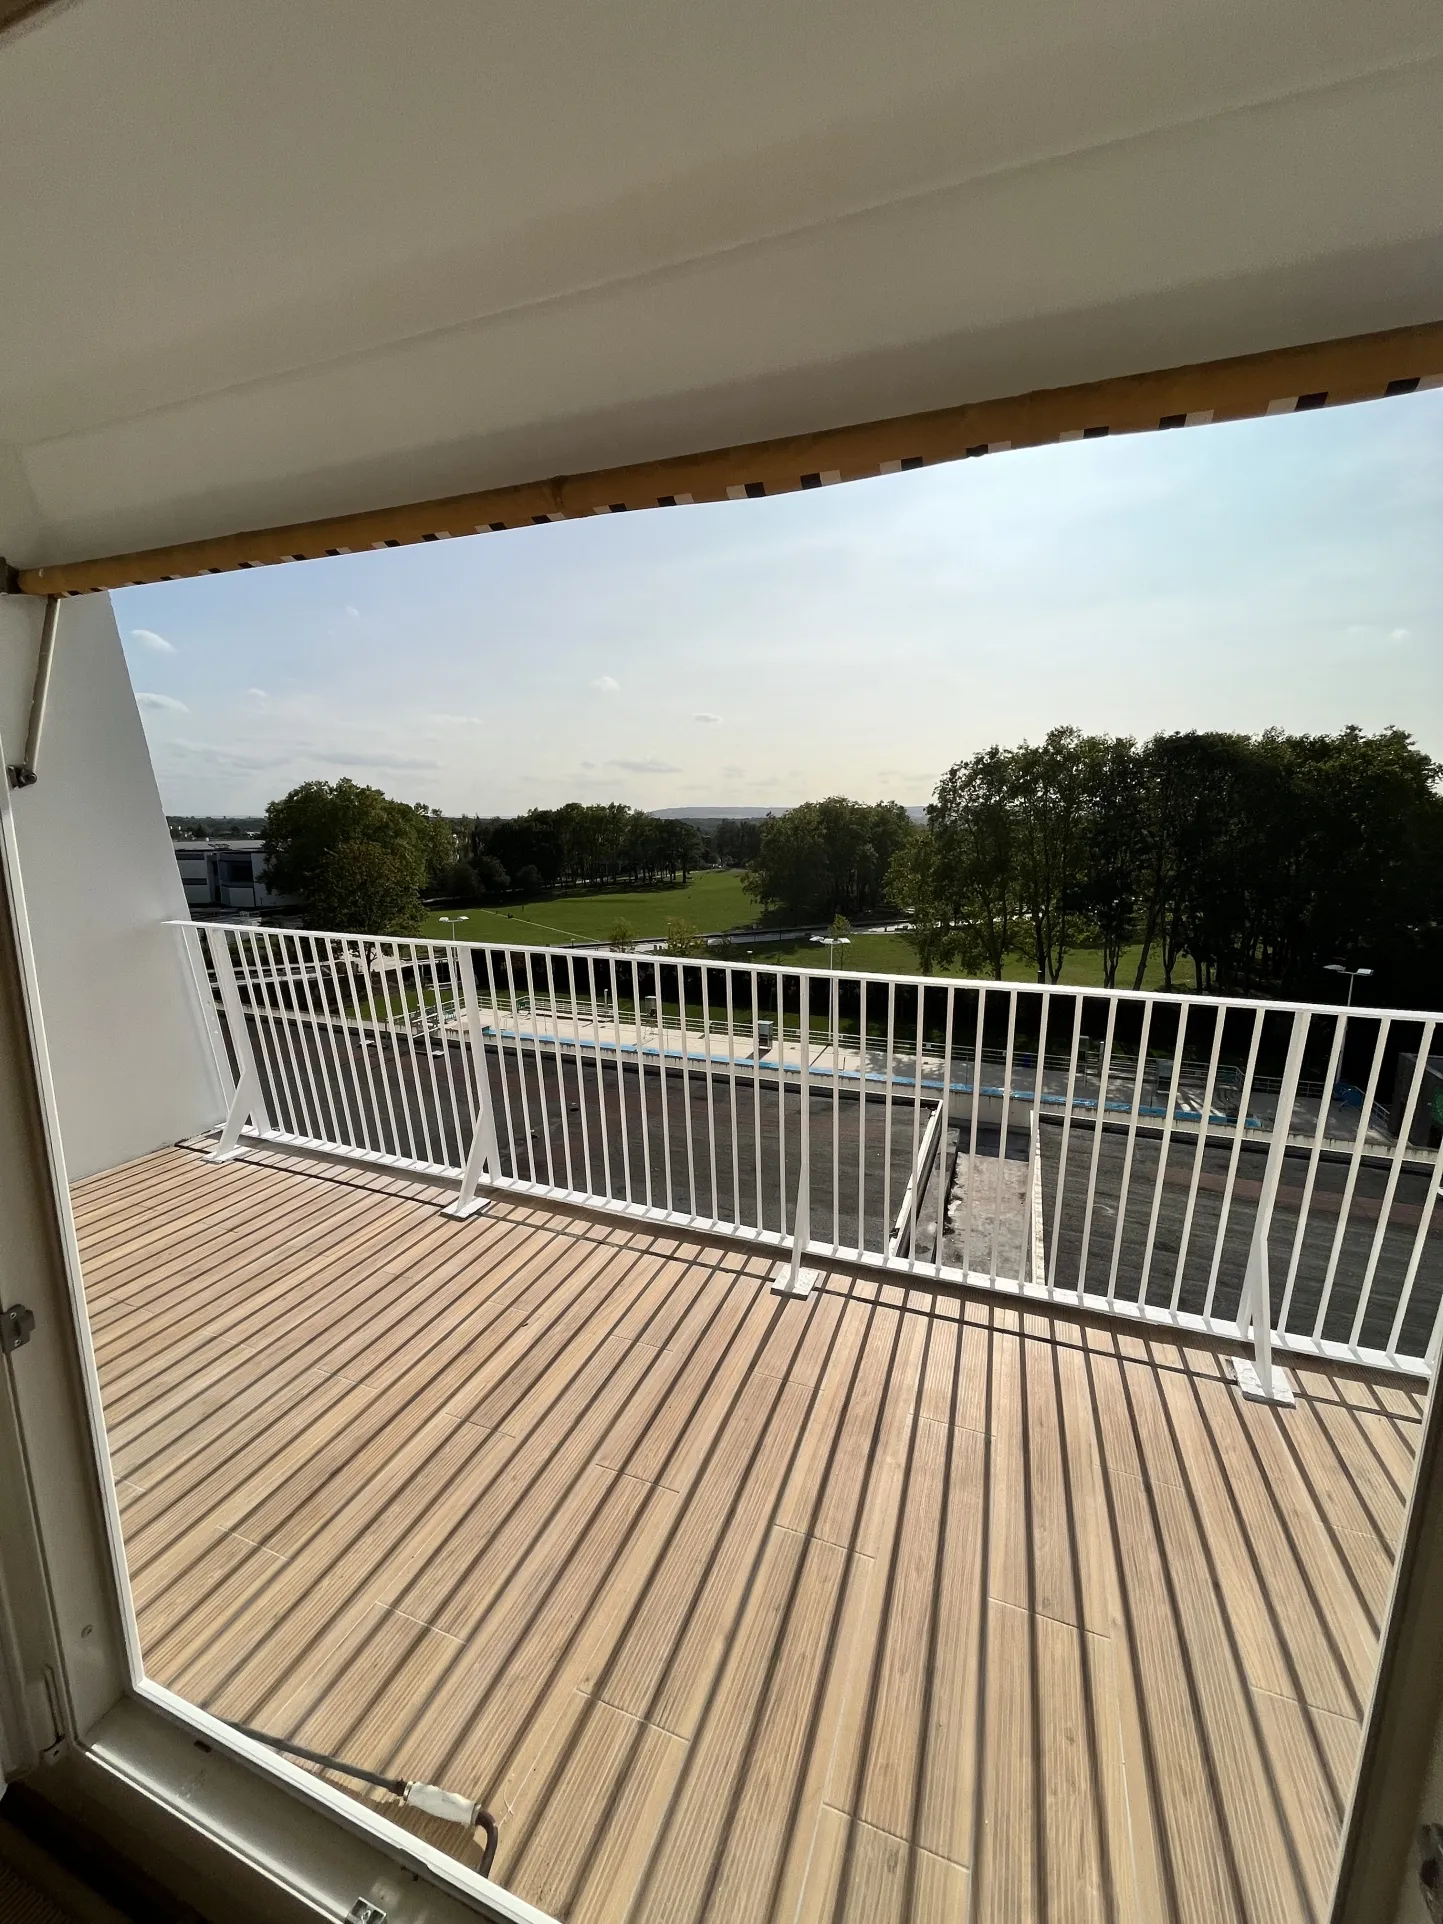 Appartement F2 Cergy Préfecture 